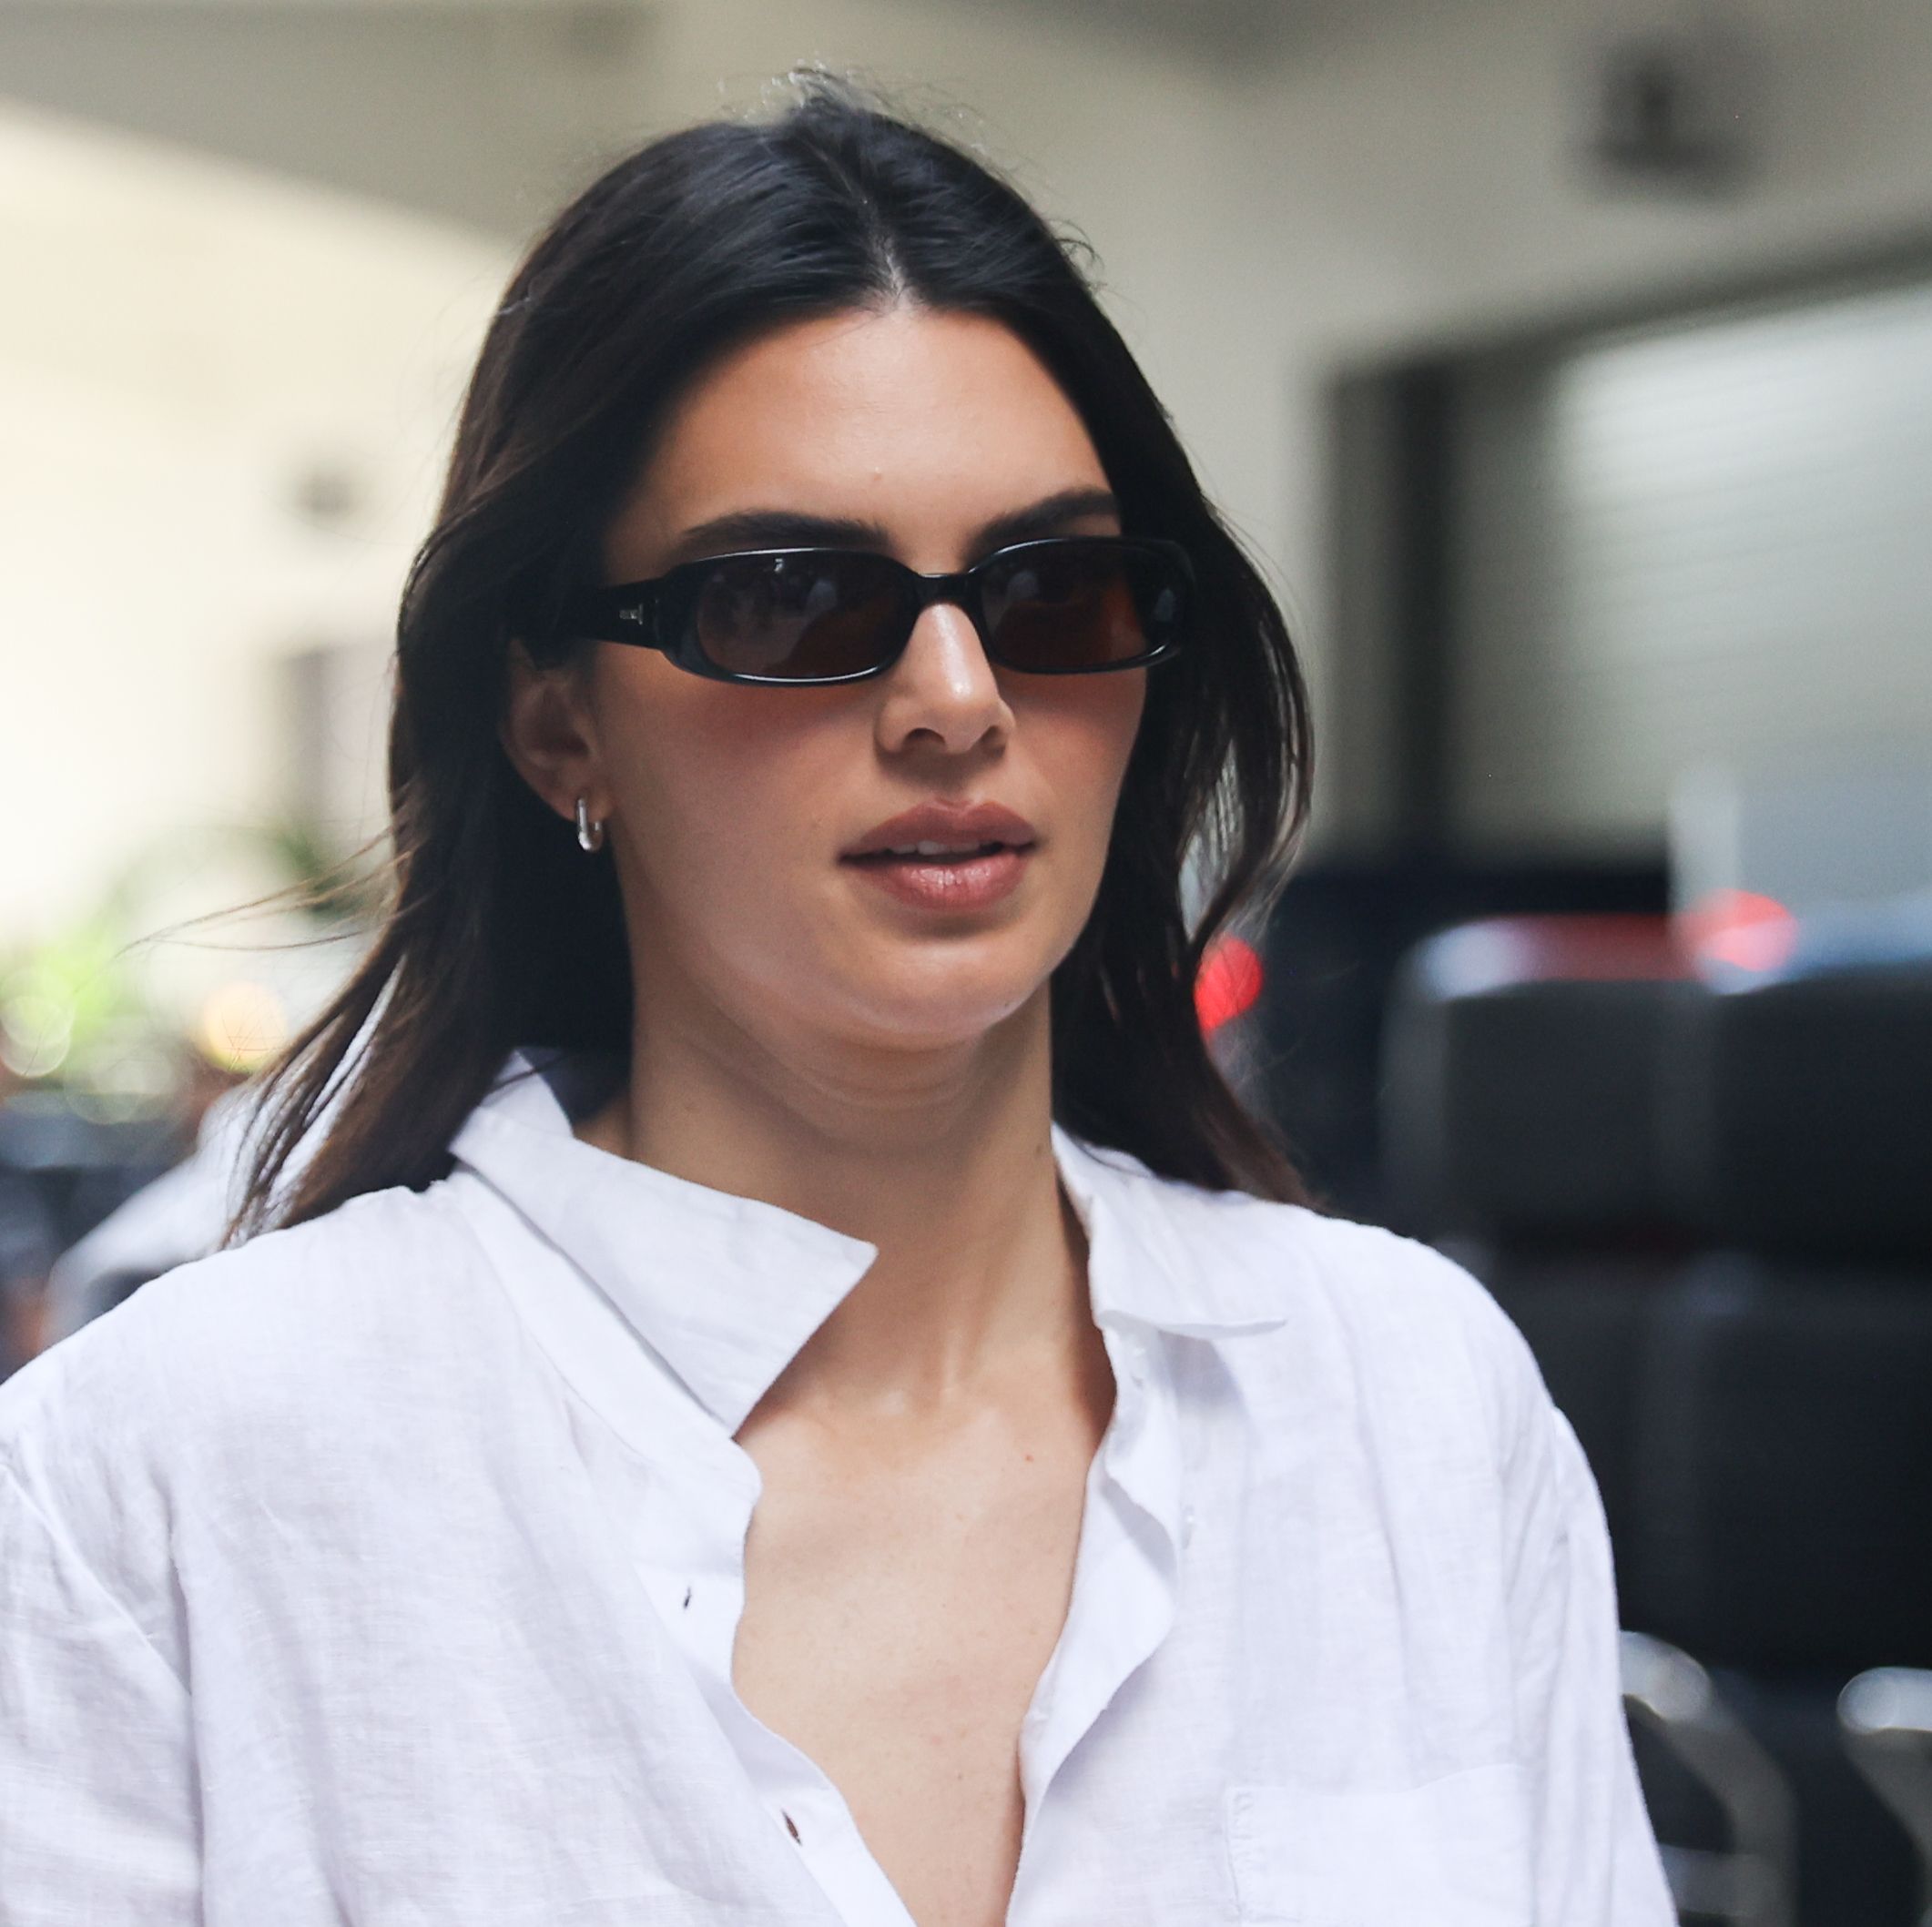 Kendall Jenner Brings the Cool to Miami F1 Weekend in a Crisp White Fit